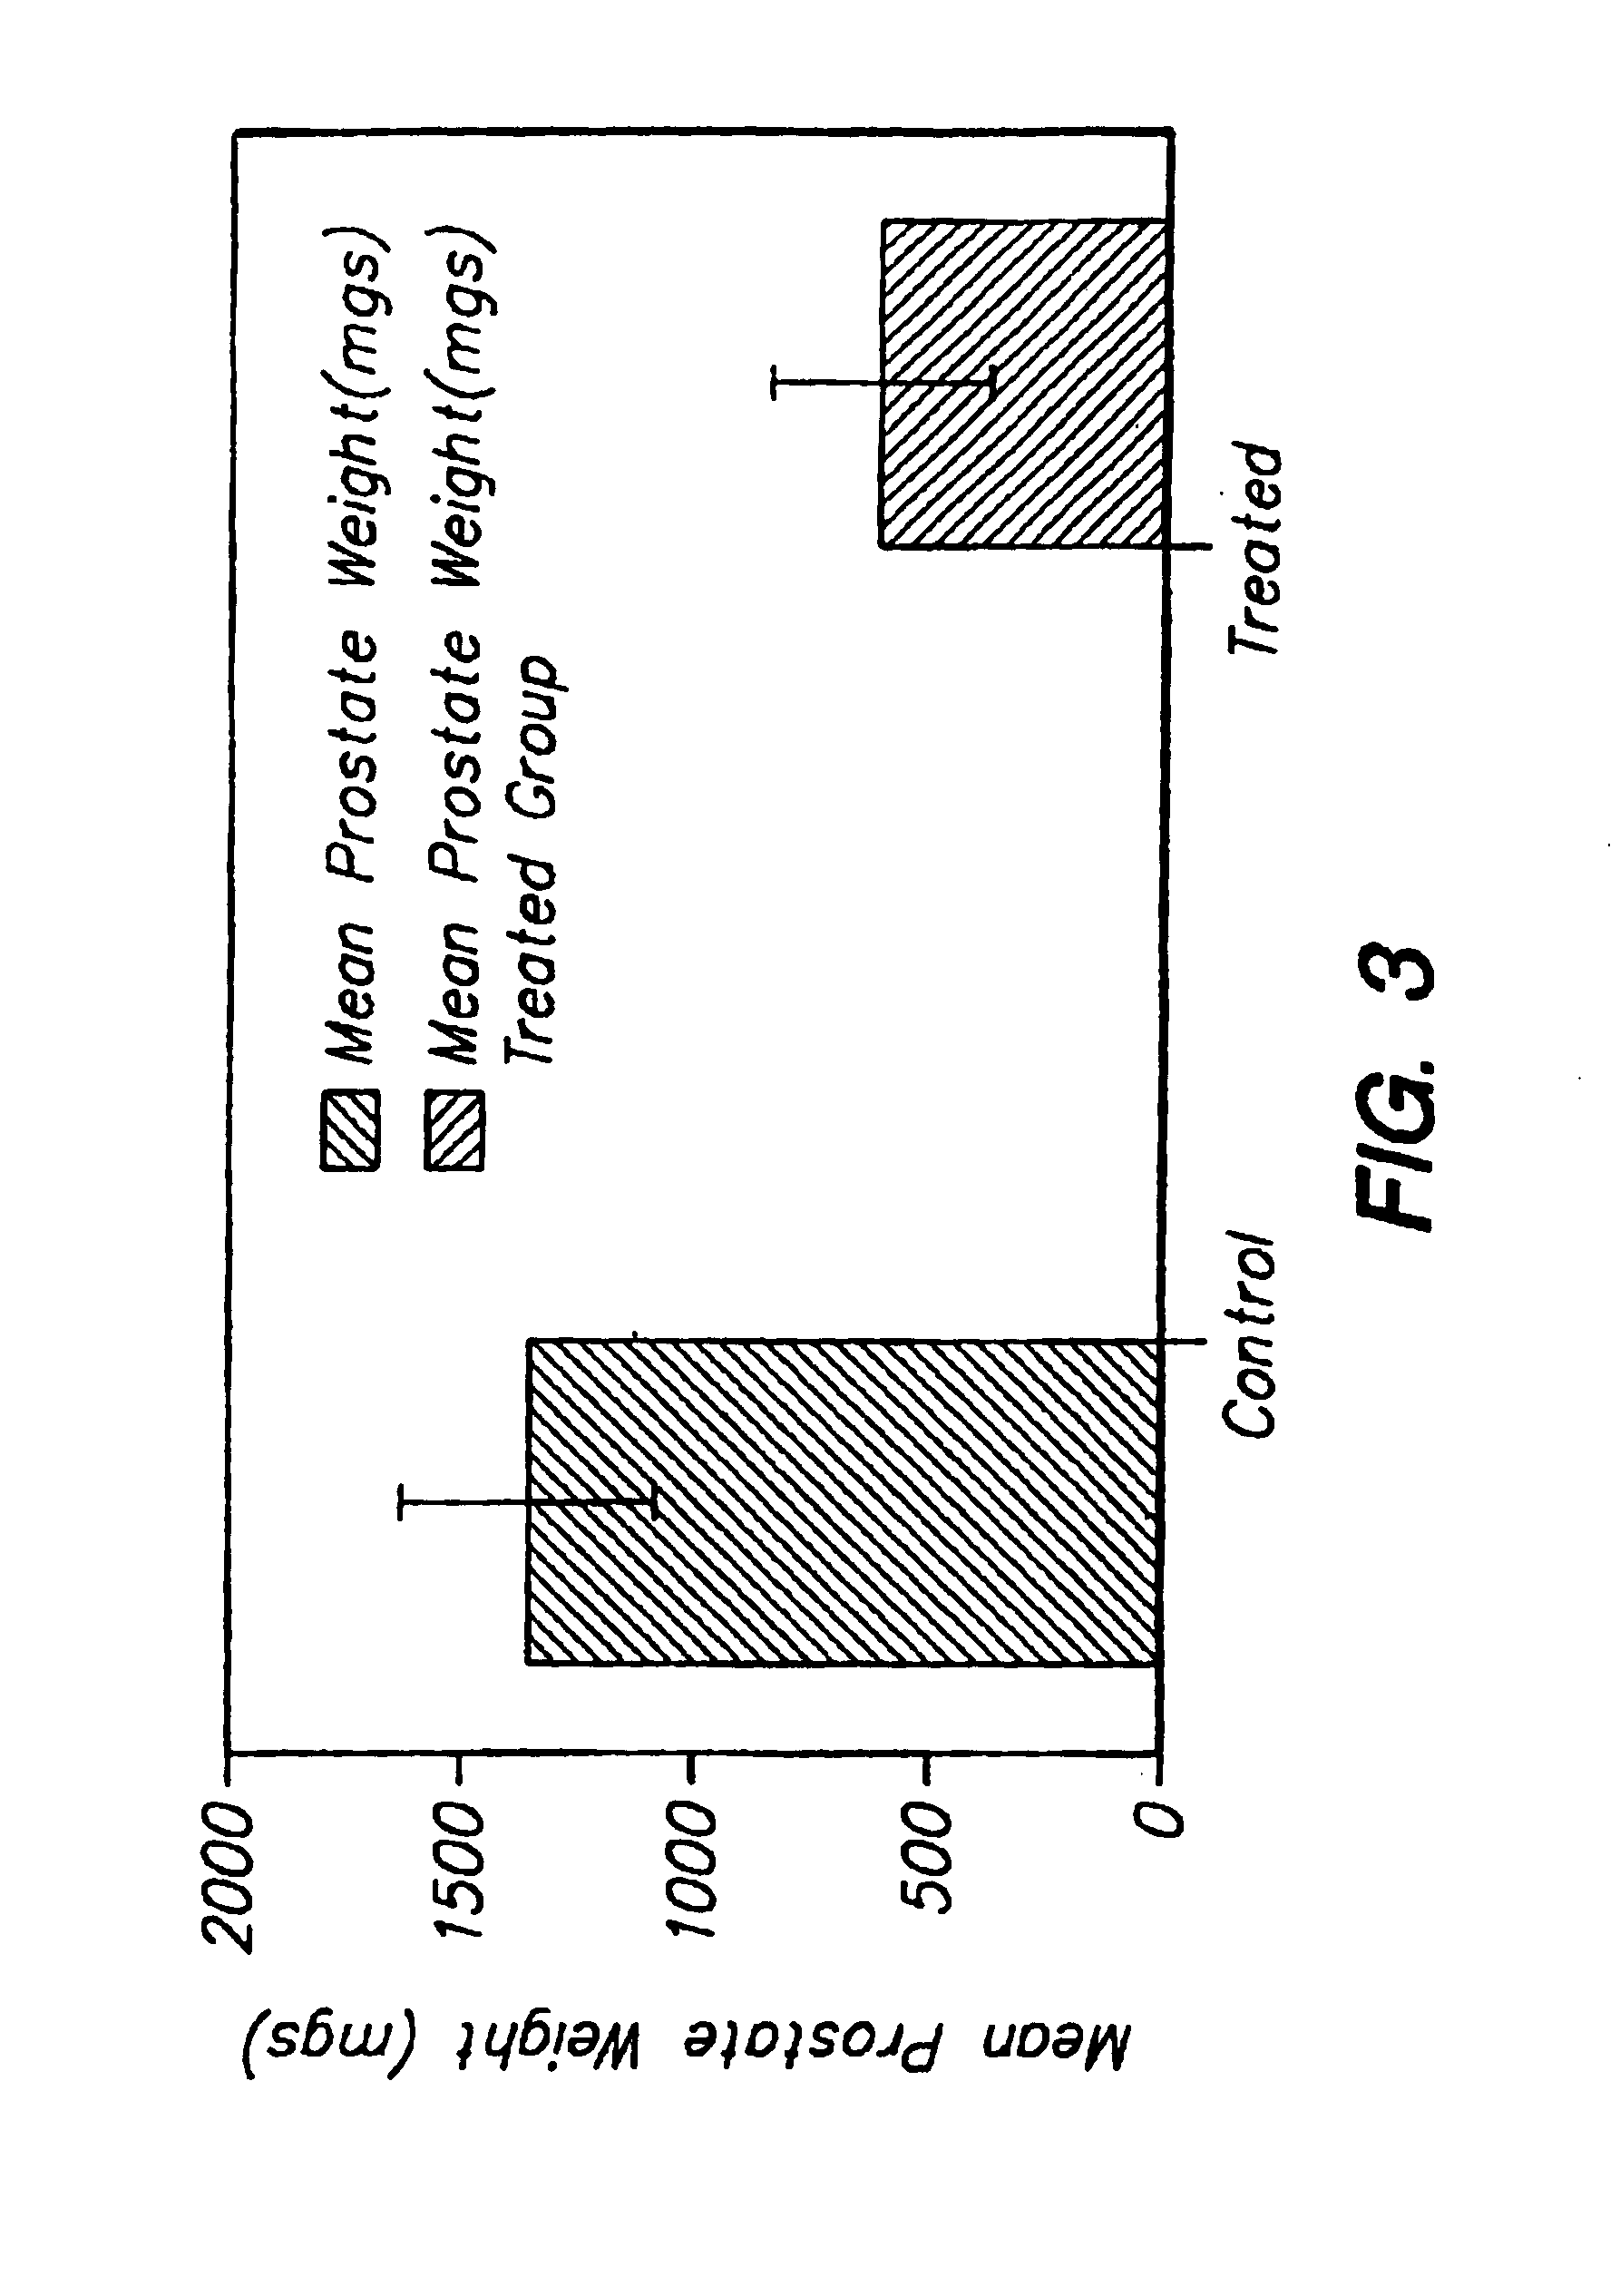 Method for increasing the serum half-life of a biologically active molecule